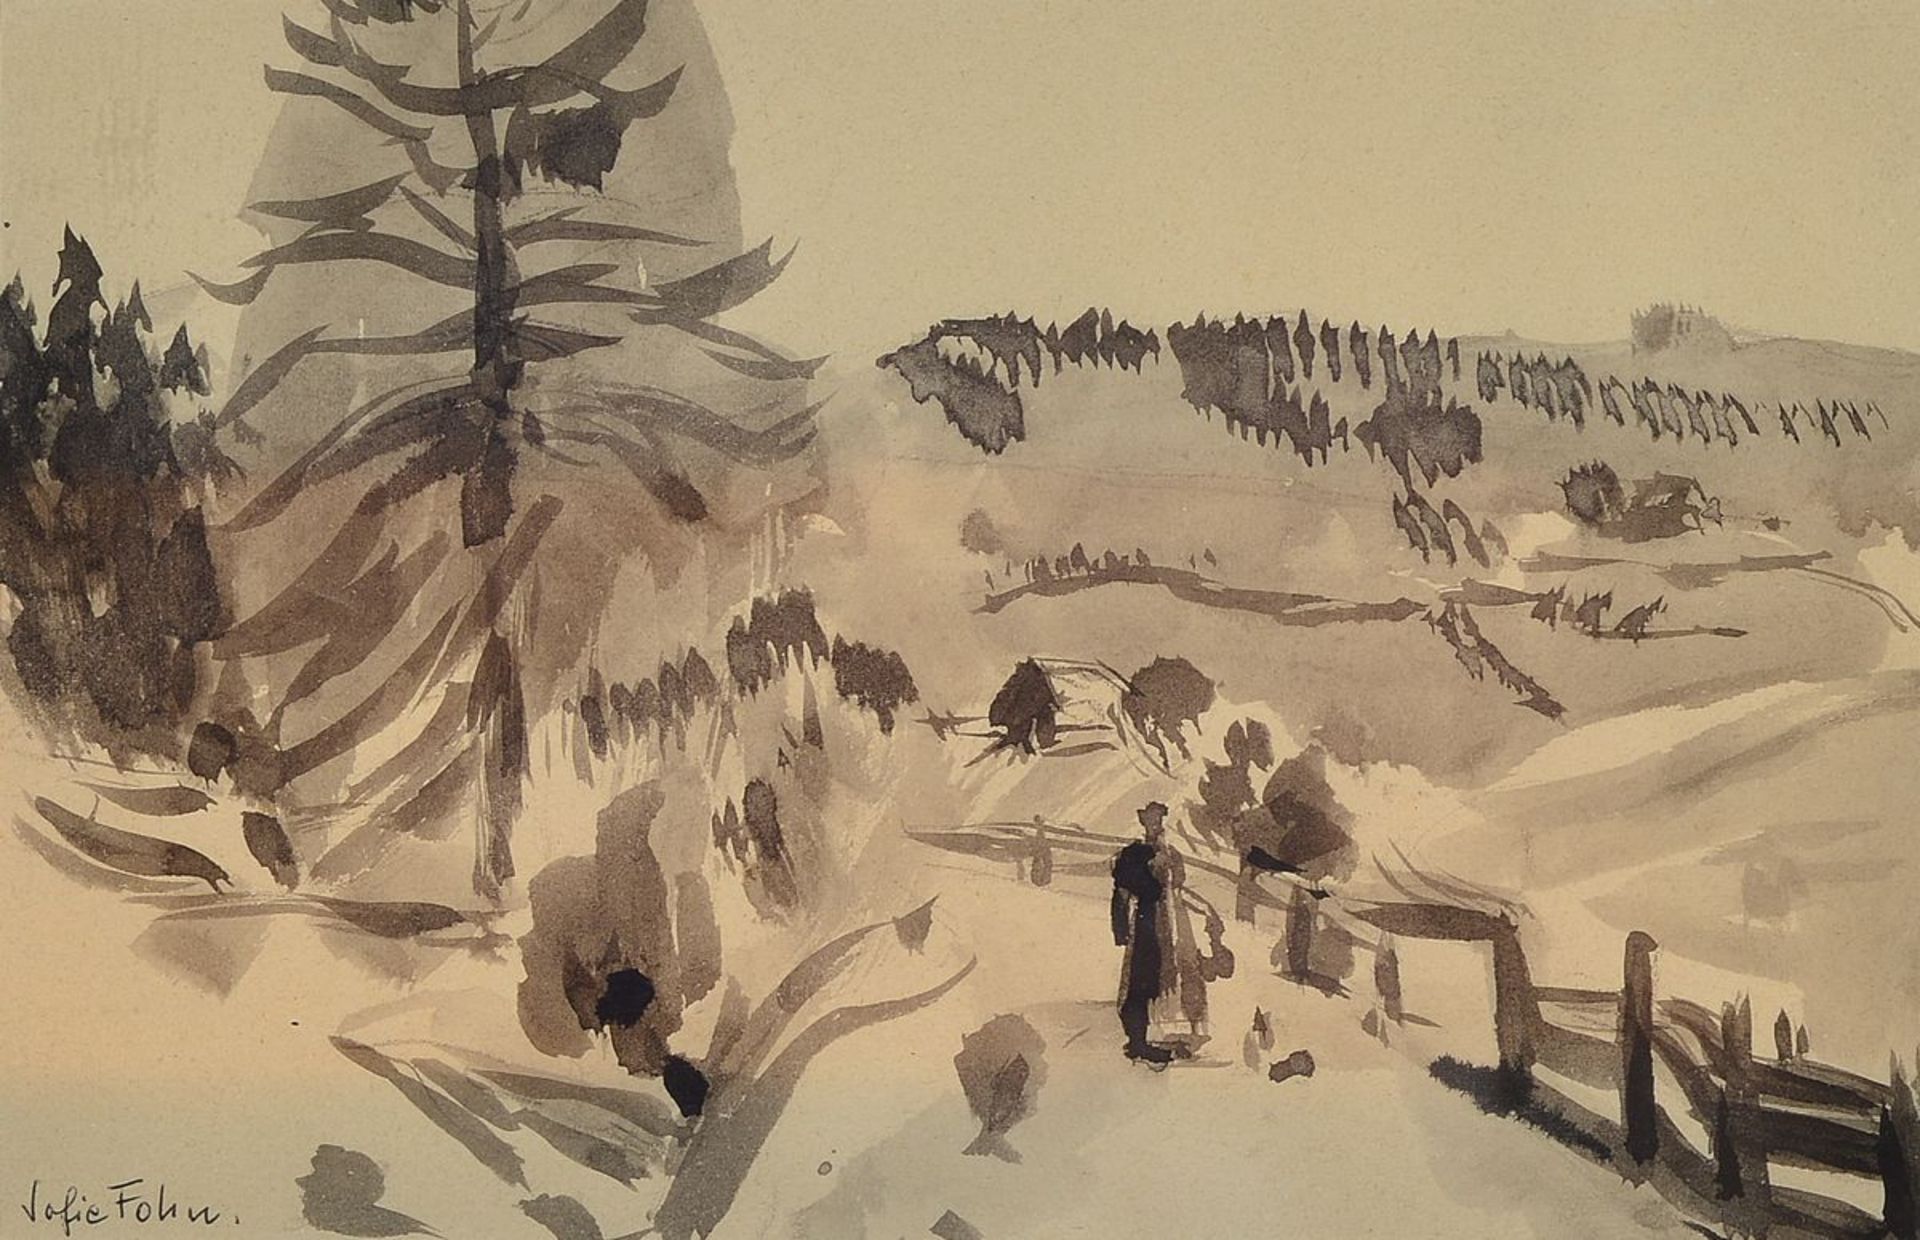 Sofie Fohn, 1899 Munich-1990 Bozen, hiker in the mountains, monochrome watercolor, signed by hand on